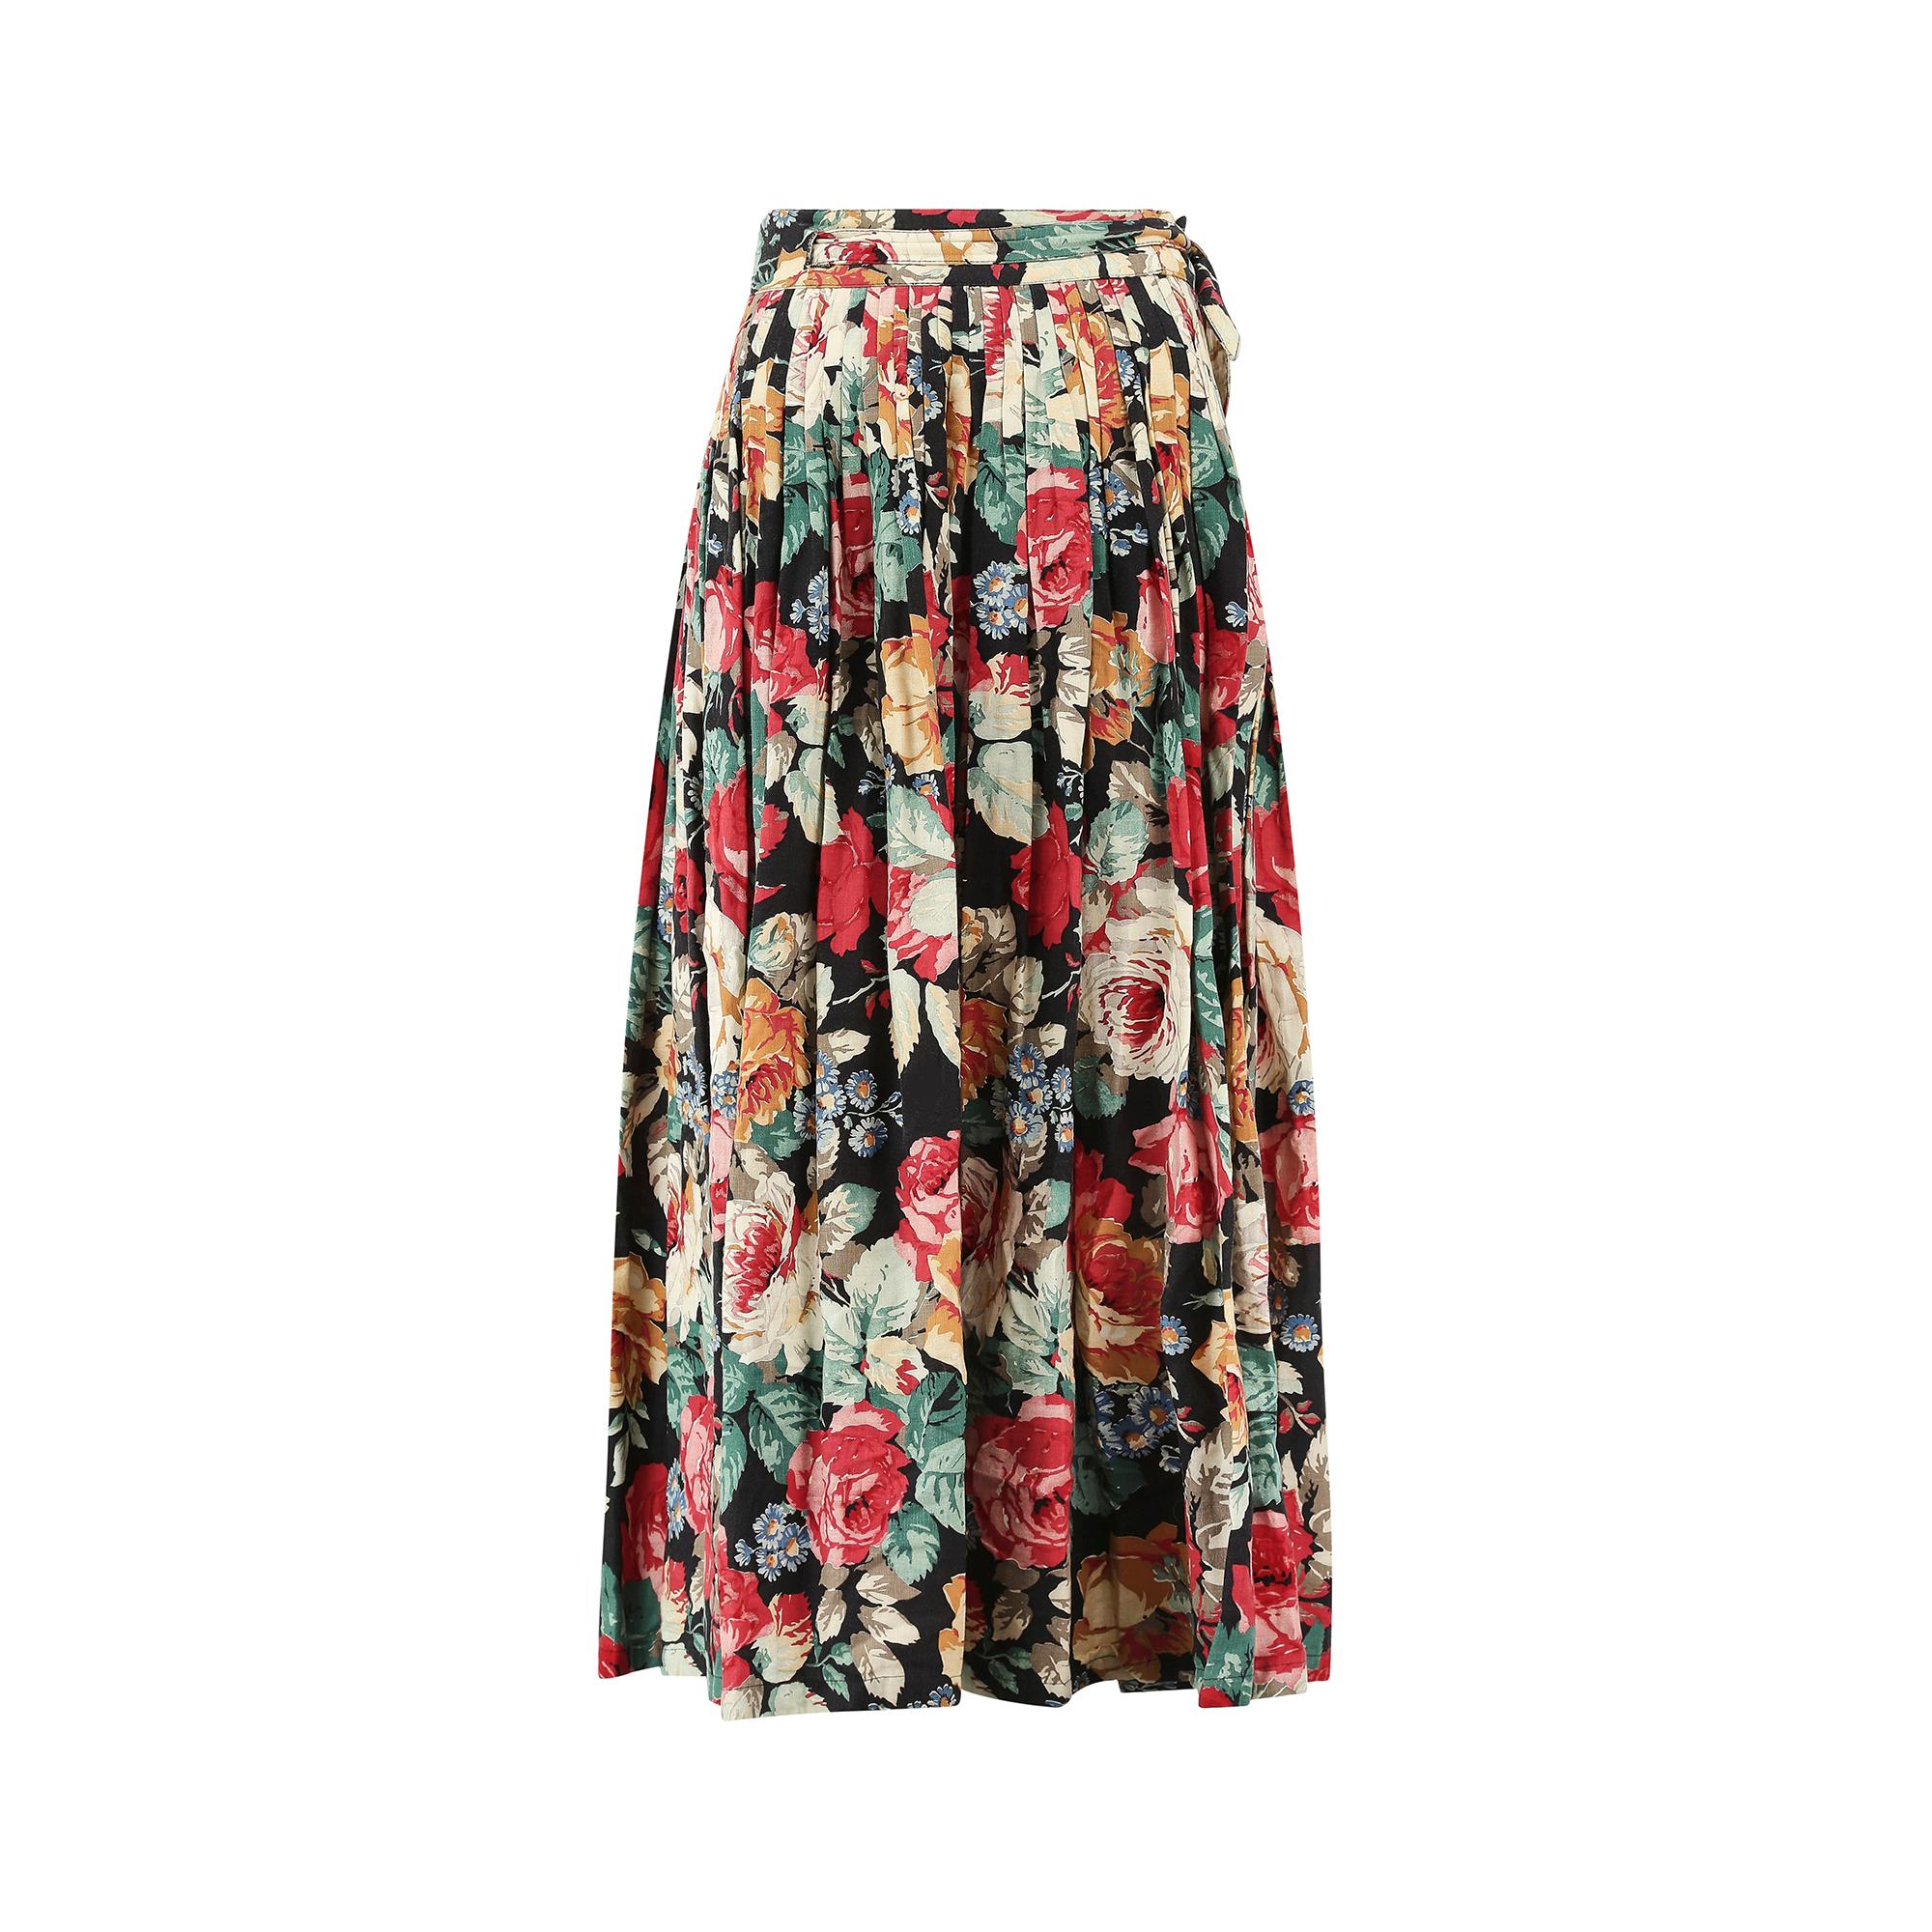 This early 1980s Christian Aujard skirt is constructed from a thick, high quality cotton fabric in a classic wrap over style silhouette. It is pleated on either side of the hip which creates a lovely flowing effect all the way down to the hem. Due